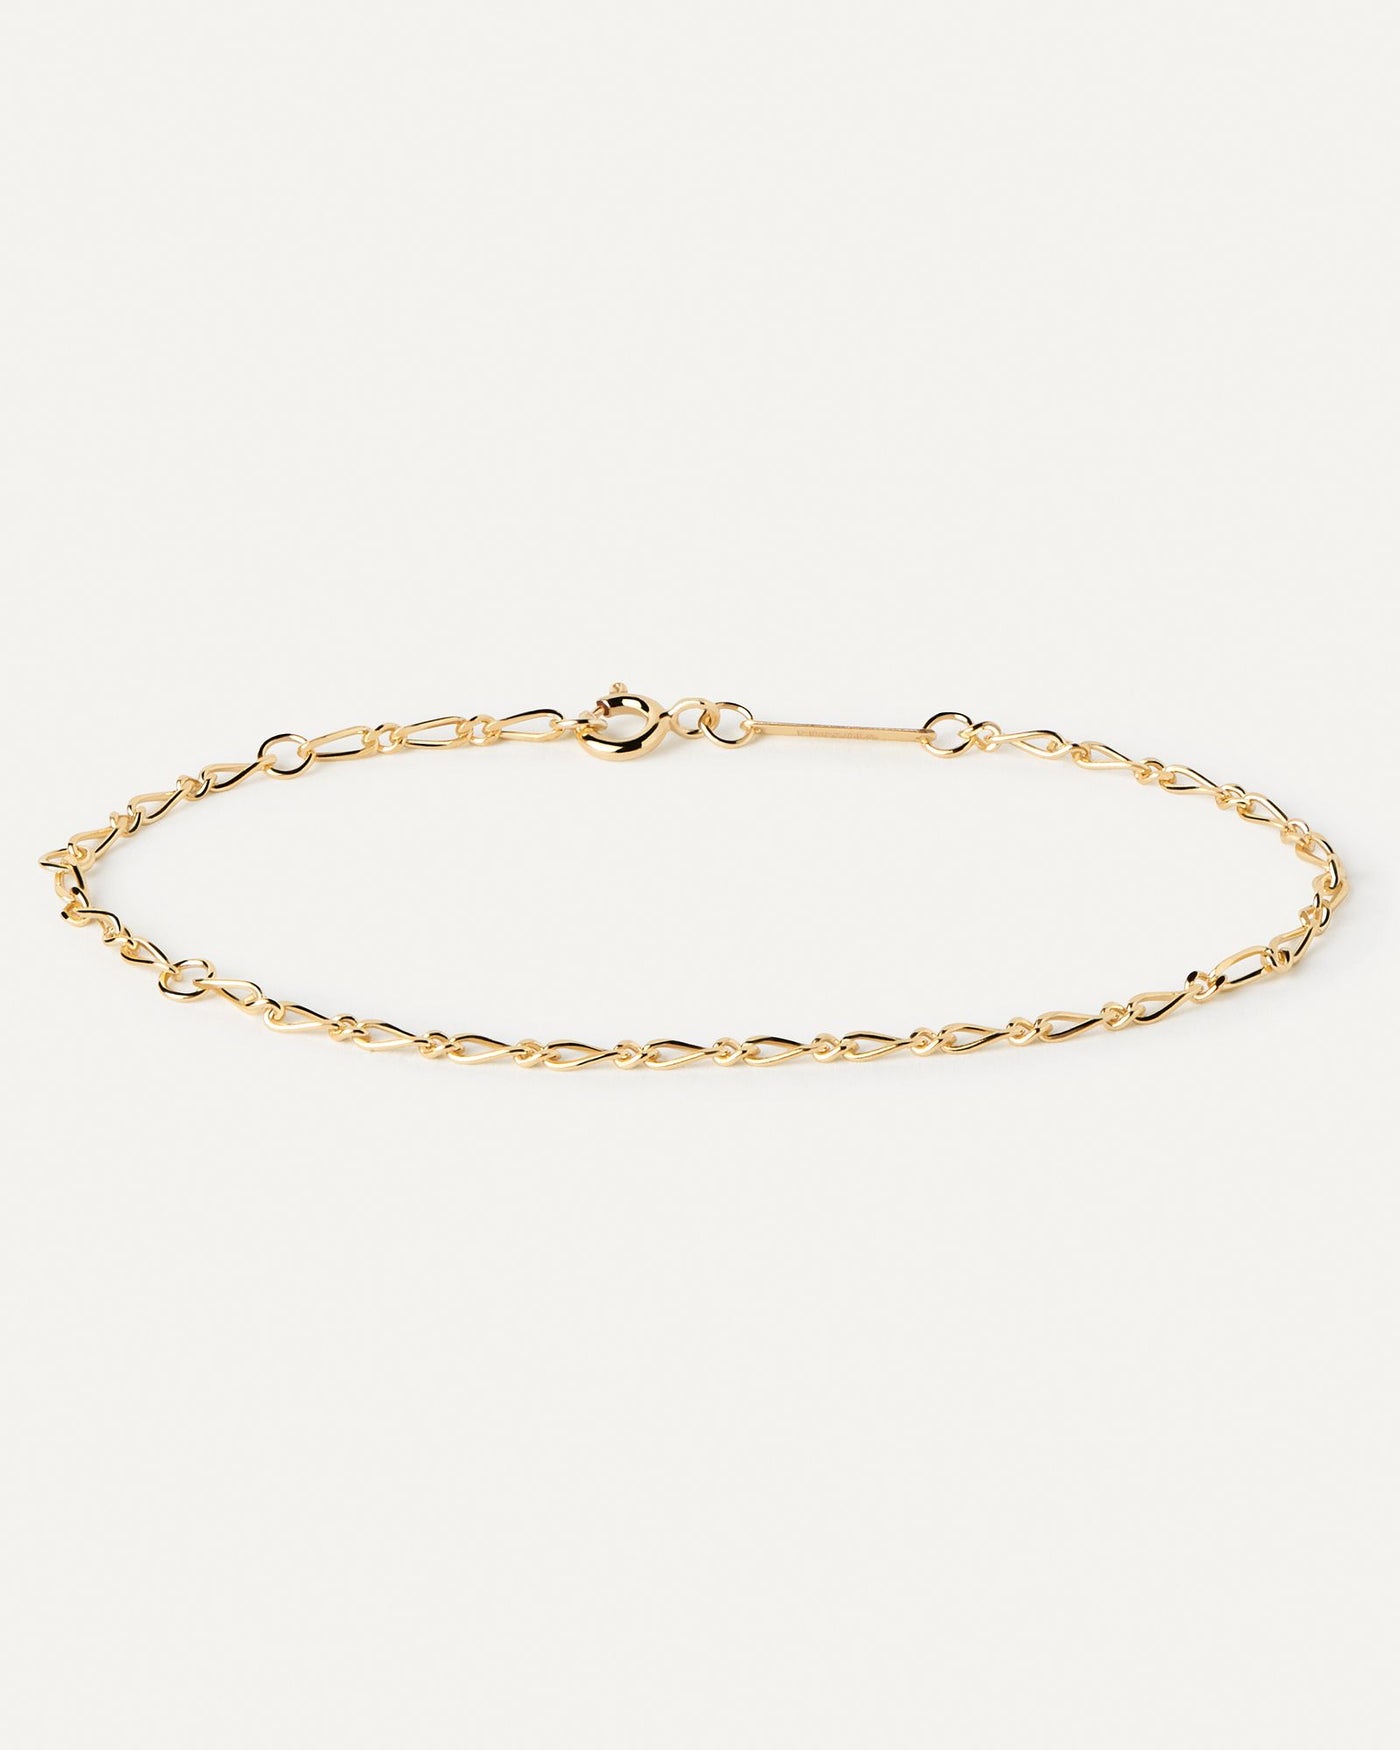 2024 Selection | Adele Chain Bracelet. Gold-plated sleek chain bracelet with intertwined asymmetric links. Get the latest arrival from PDPAOLA. Place your order safely and get this Best Seller. Free Shipping.